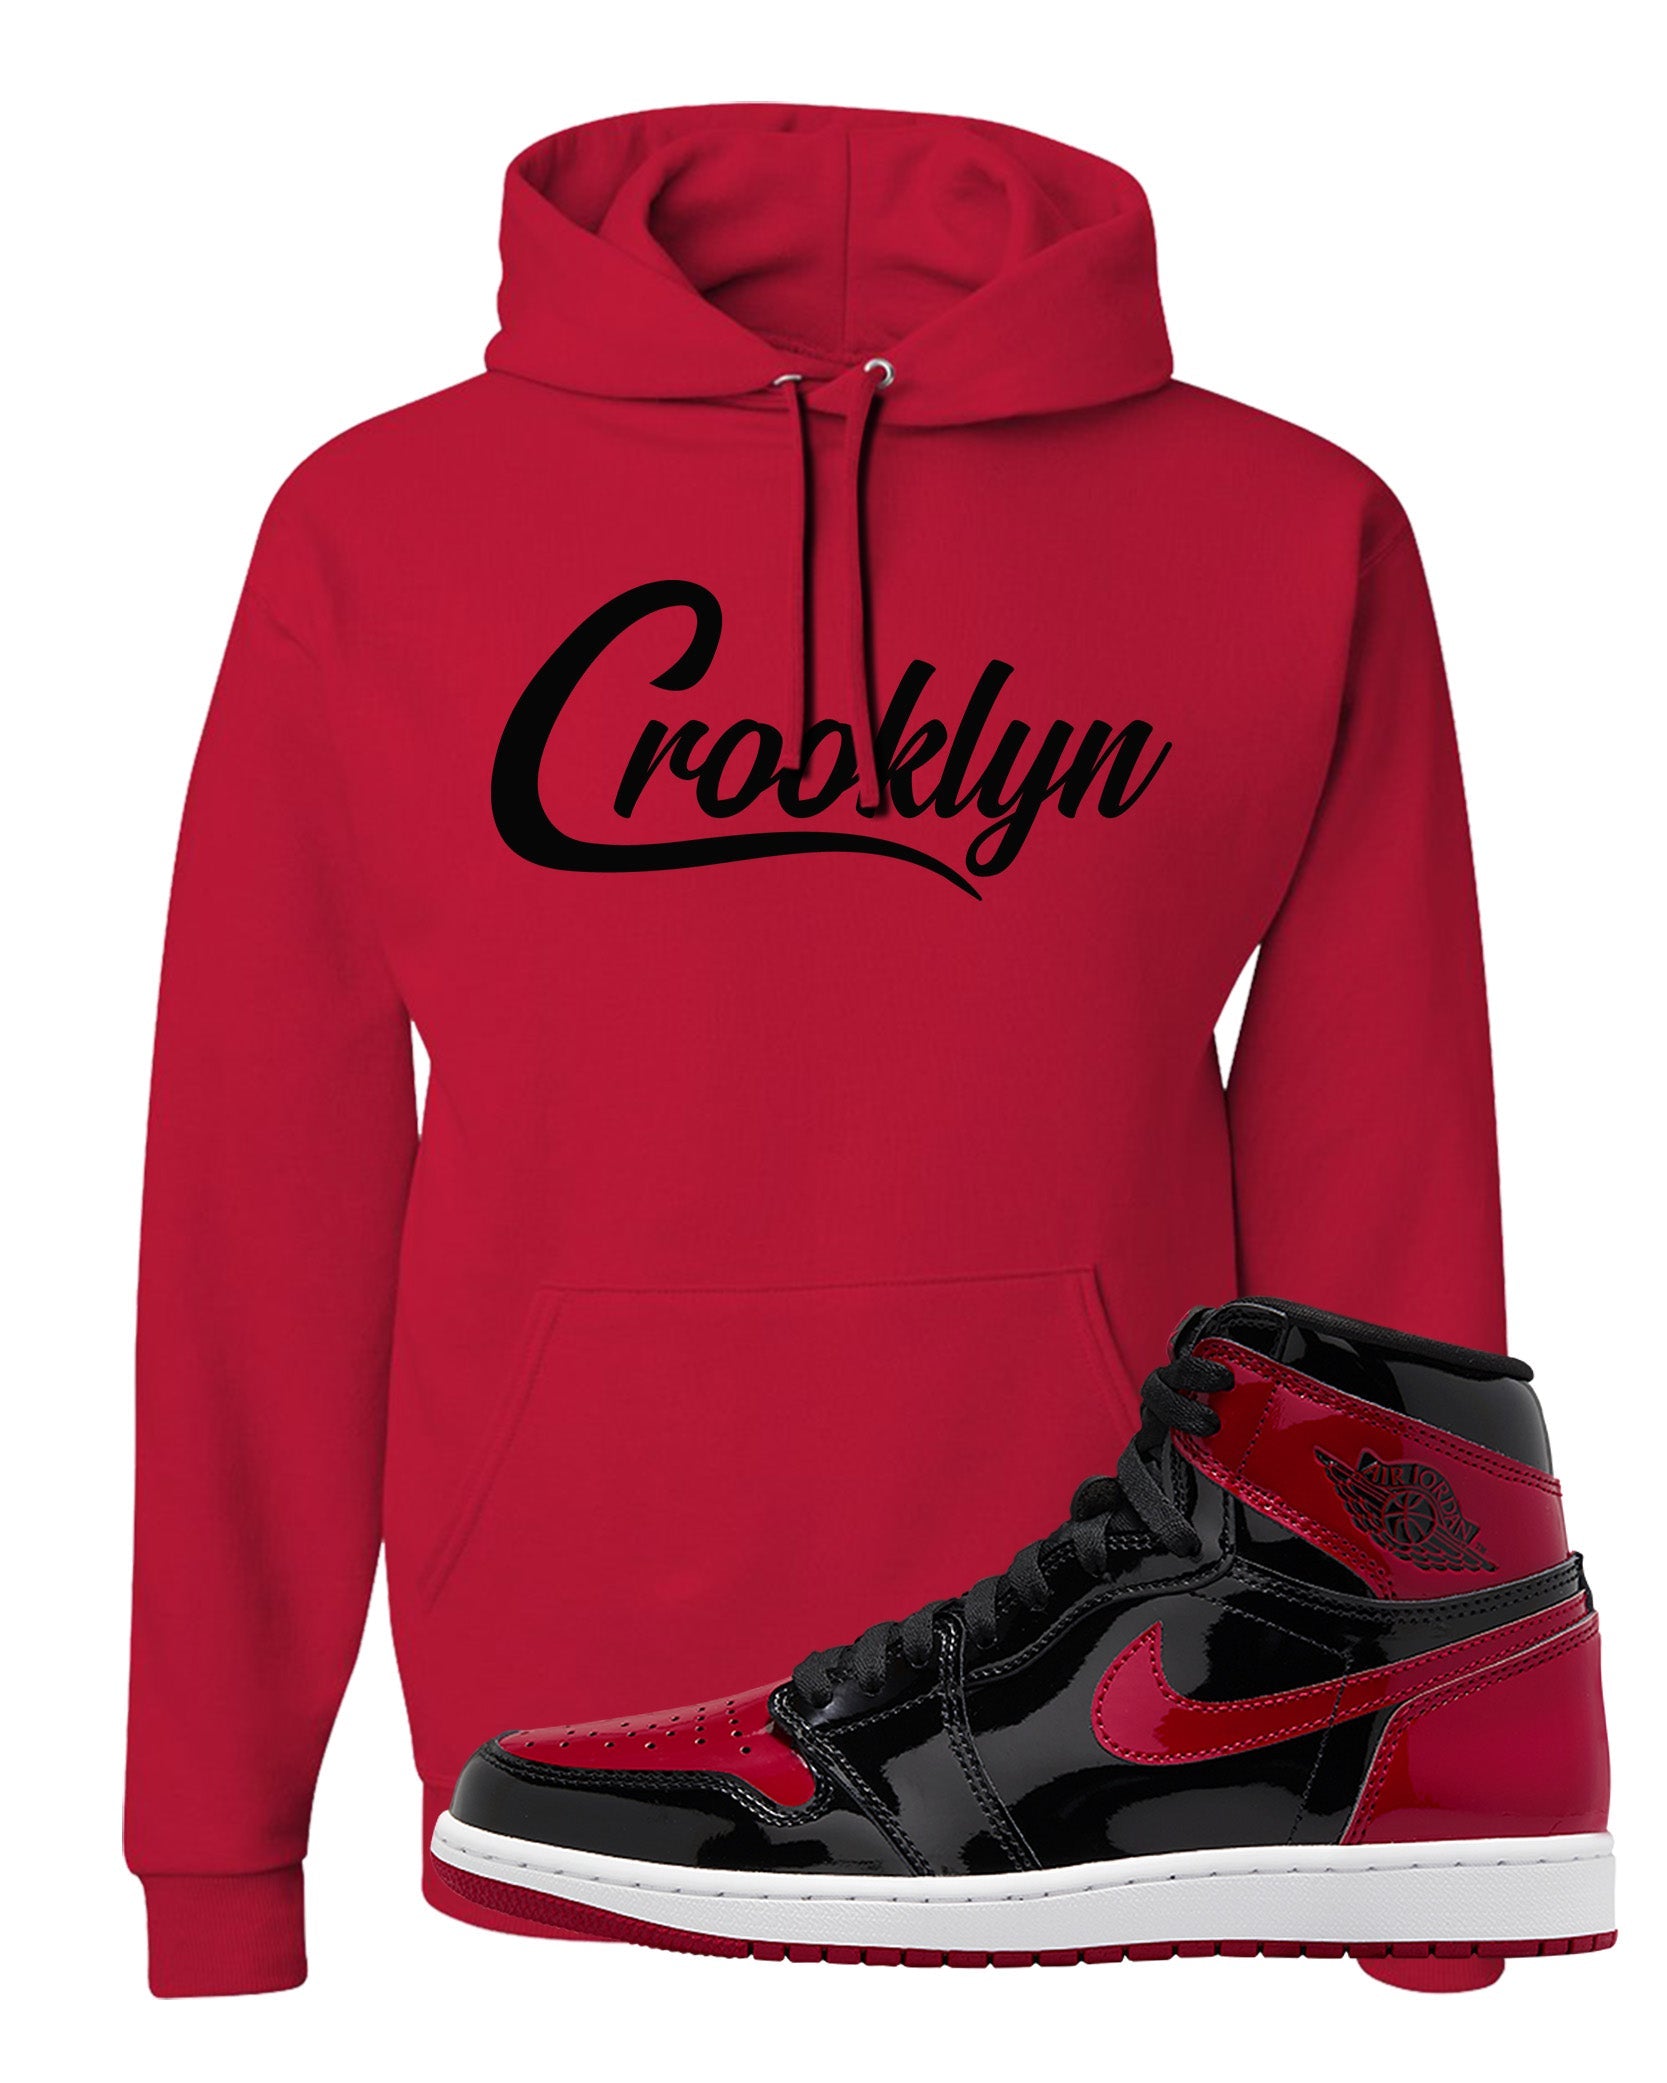 Patent Bred 1s Hoodie | Crooklyn, Red